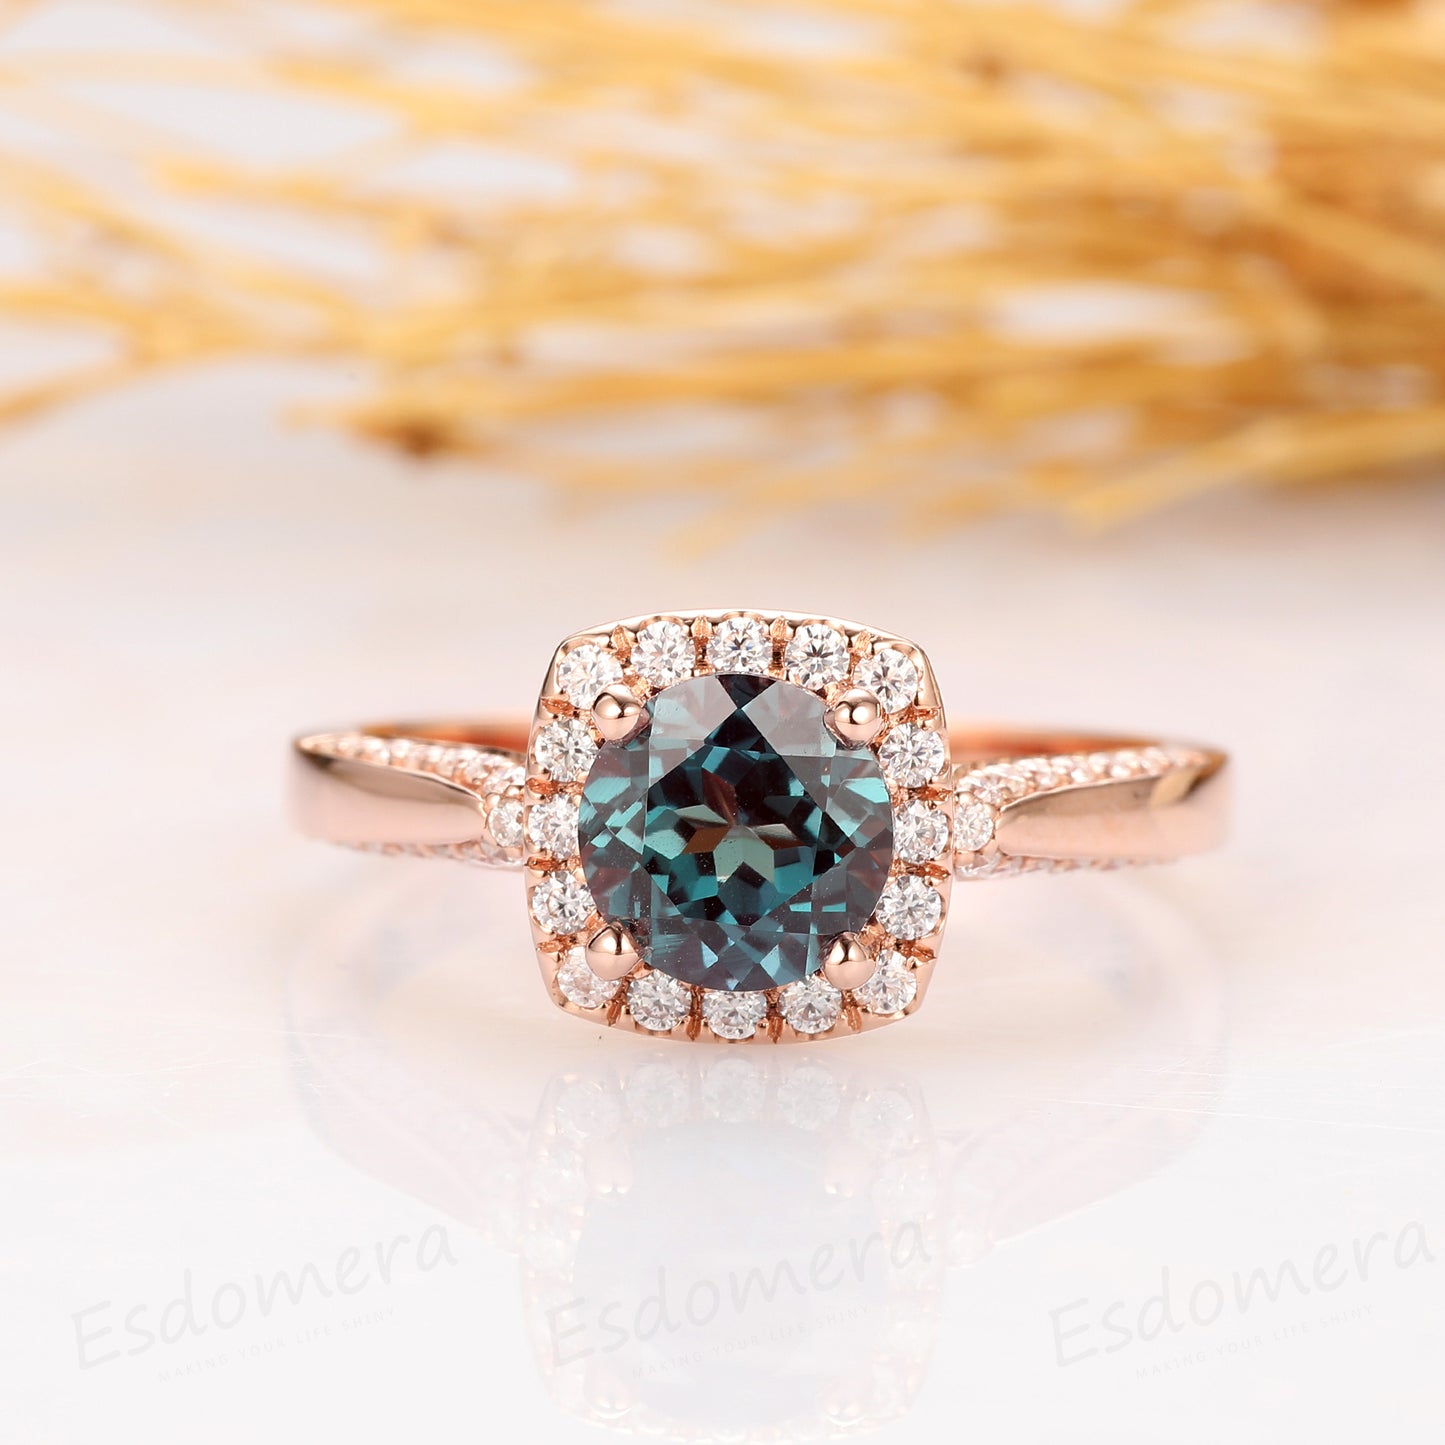 1.25ct Round Cut Alexandrite Ring, Halo Accents 14k Rose Gold Antique Filigree Engagement Ring